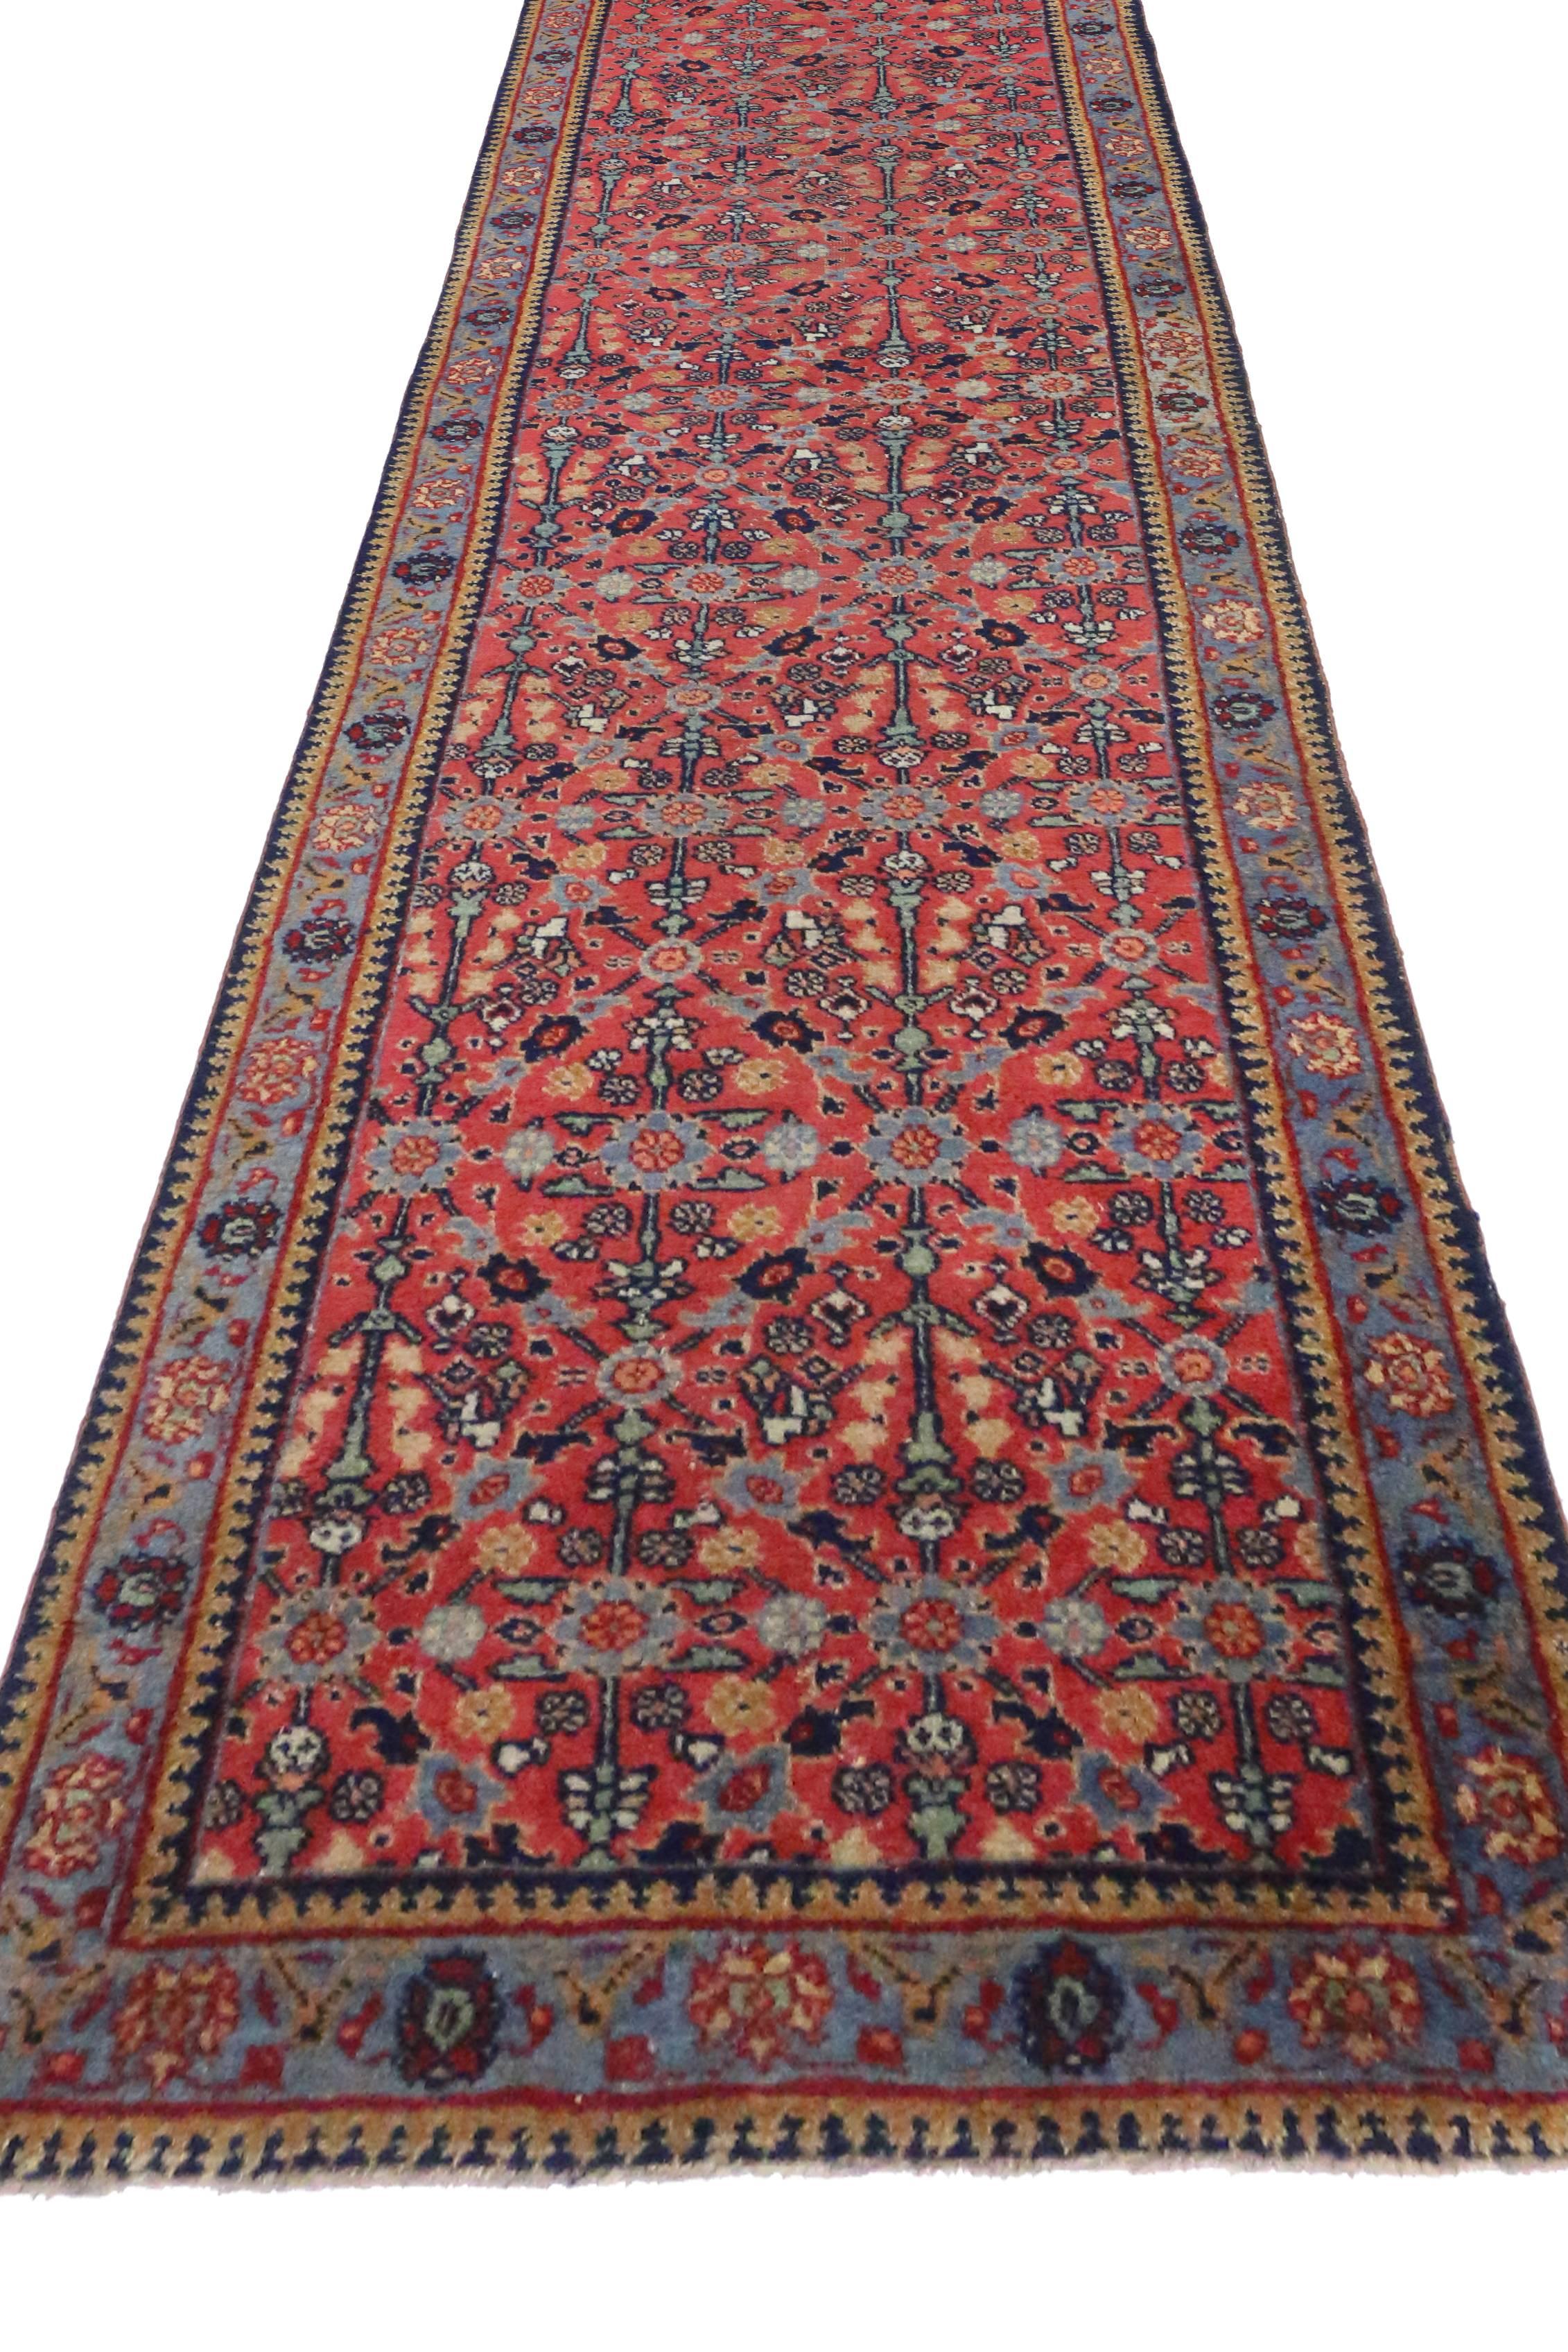 Hand-Knotted Antique Persian Tabriz Carpet Runner with Modern Traditional Style